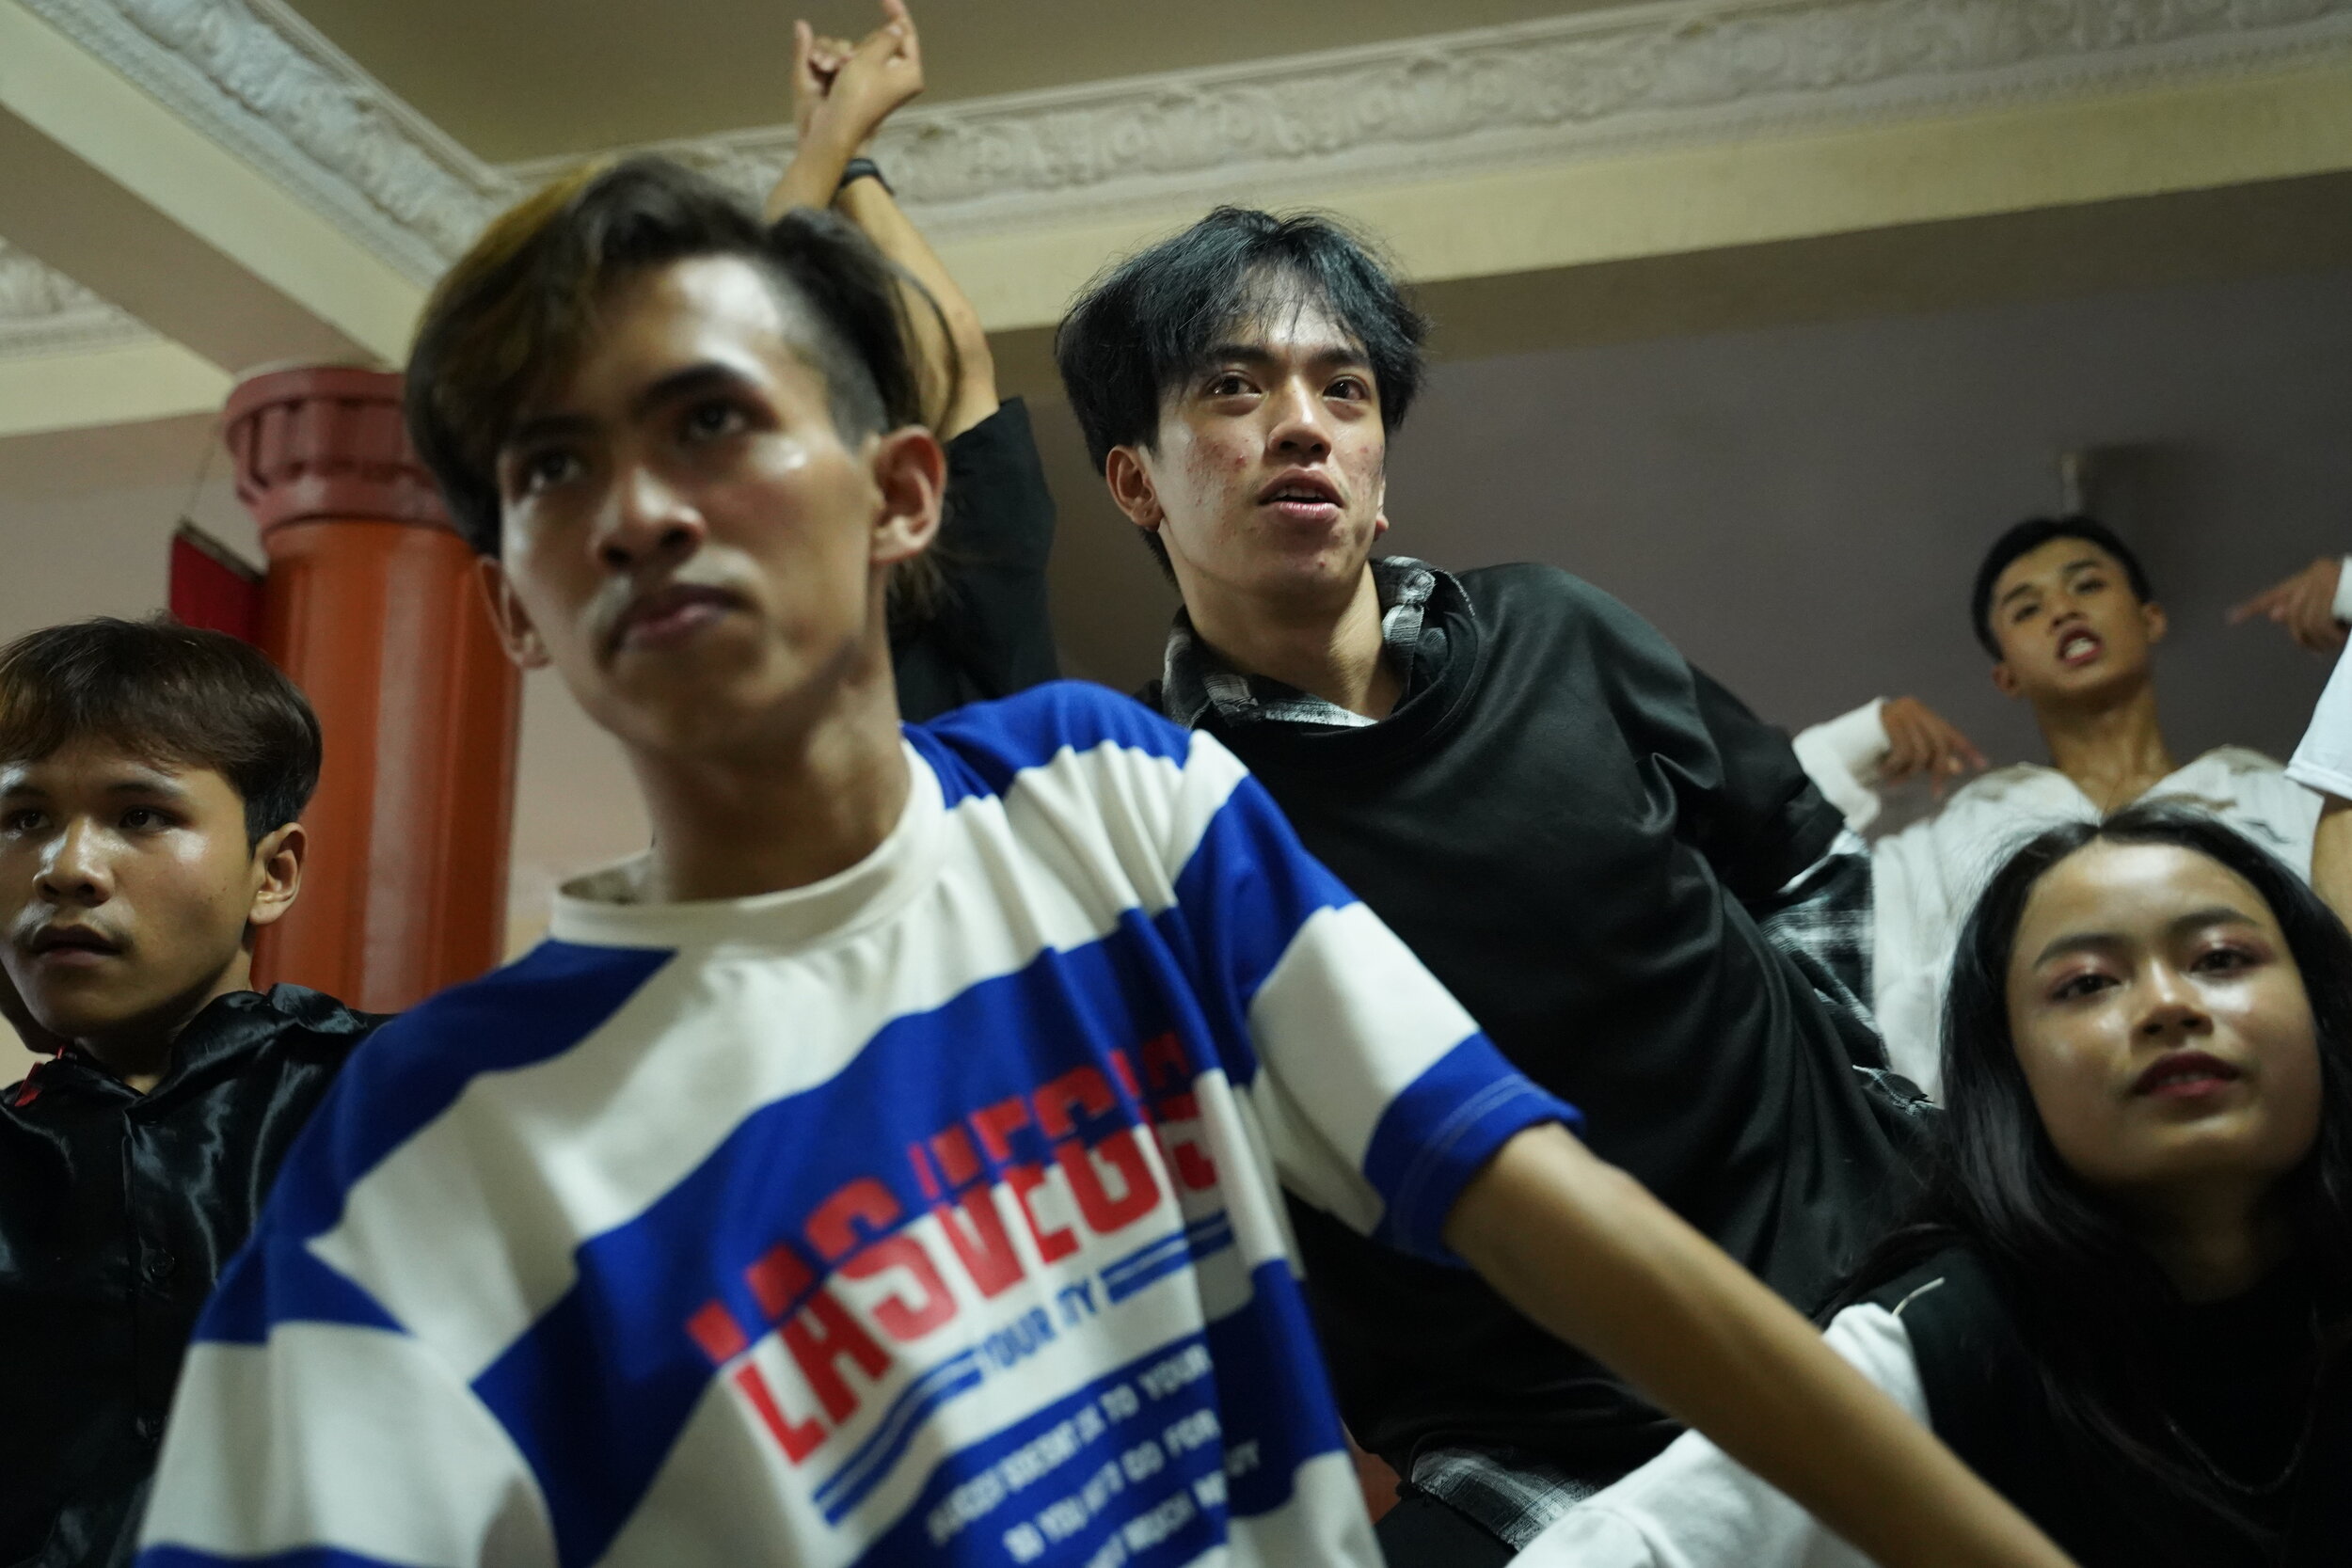  Zing and members of his dance team “The Bling” practice in a studio in Phnom Penh for an upcoming social media video. Since many of Zing’s performances were canceled due to COVID-19, he has had more time to practice with his team. 